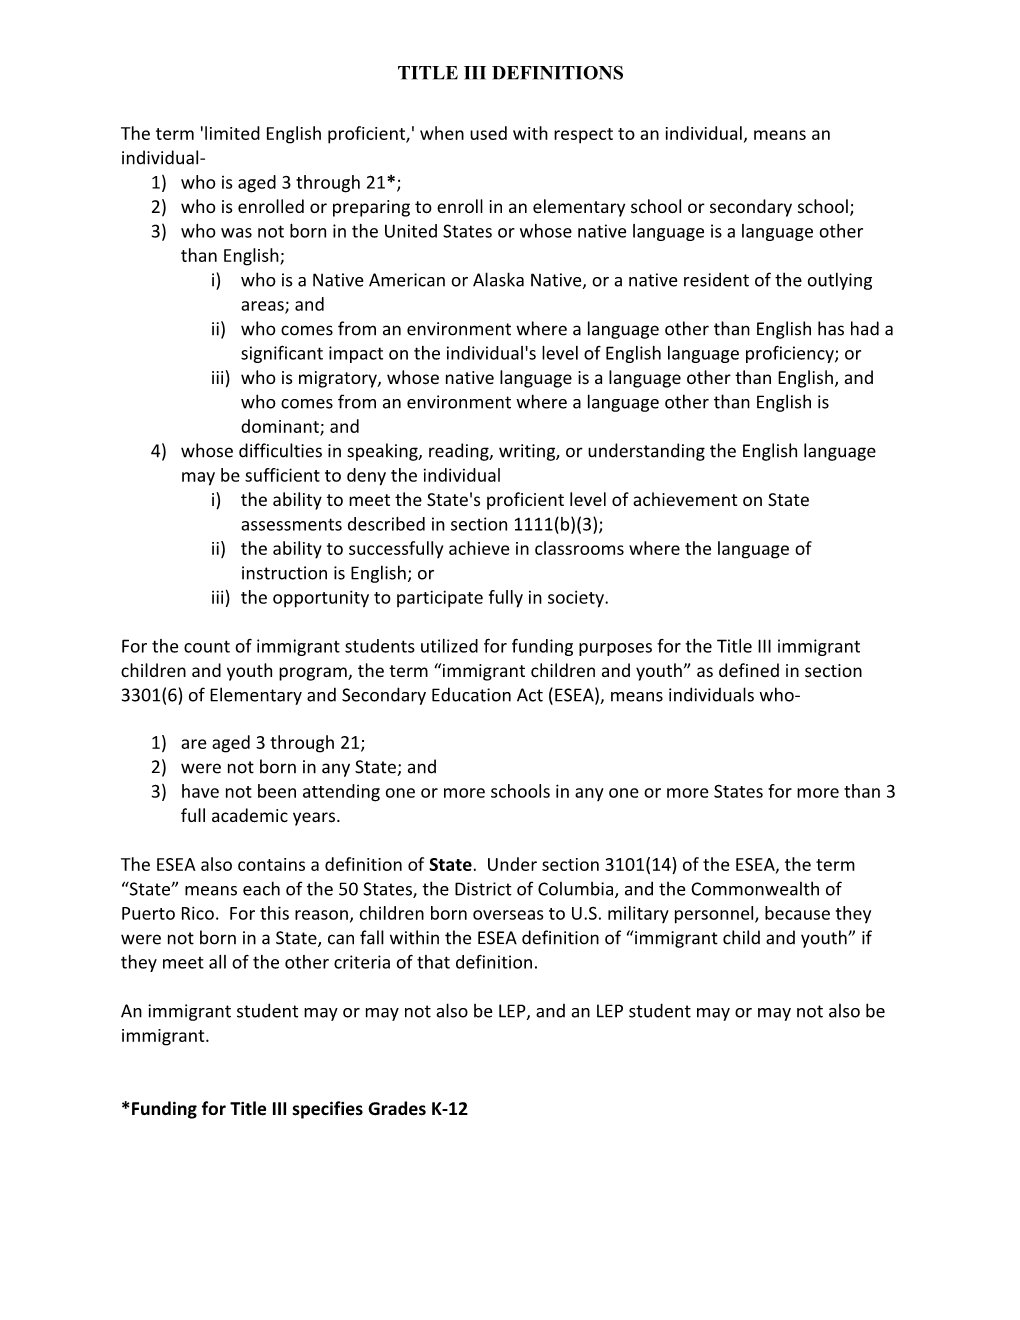 Defination Document for Title III Declaration of Participation